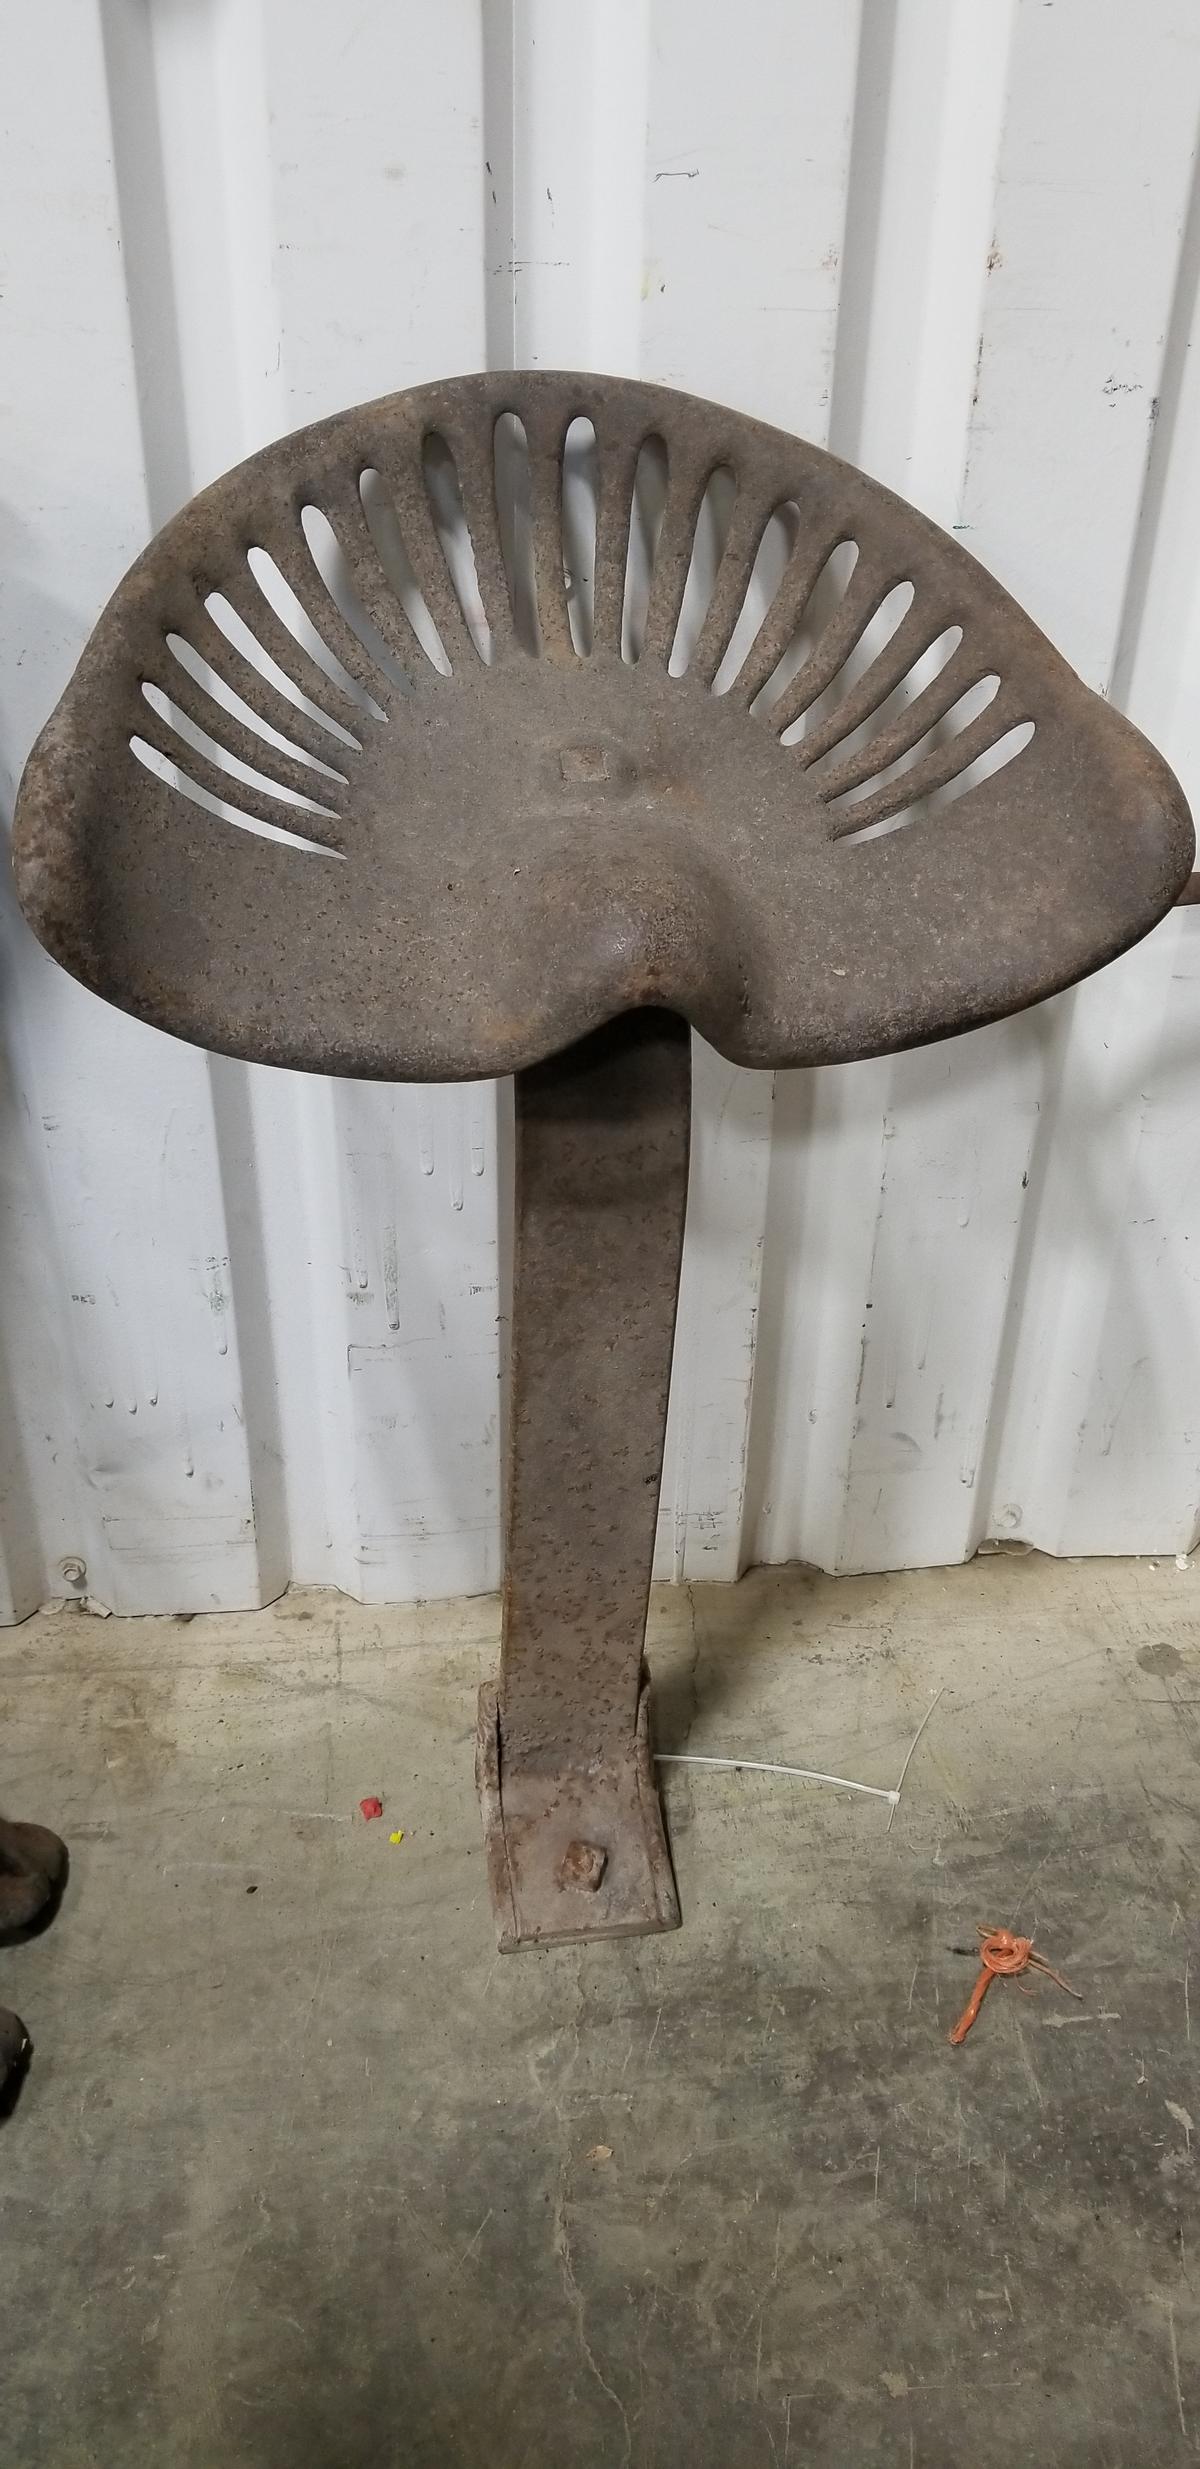 UNMARKED STEEL IMPLEMENT OR TRACTOR SEAT